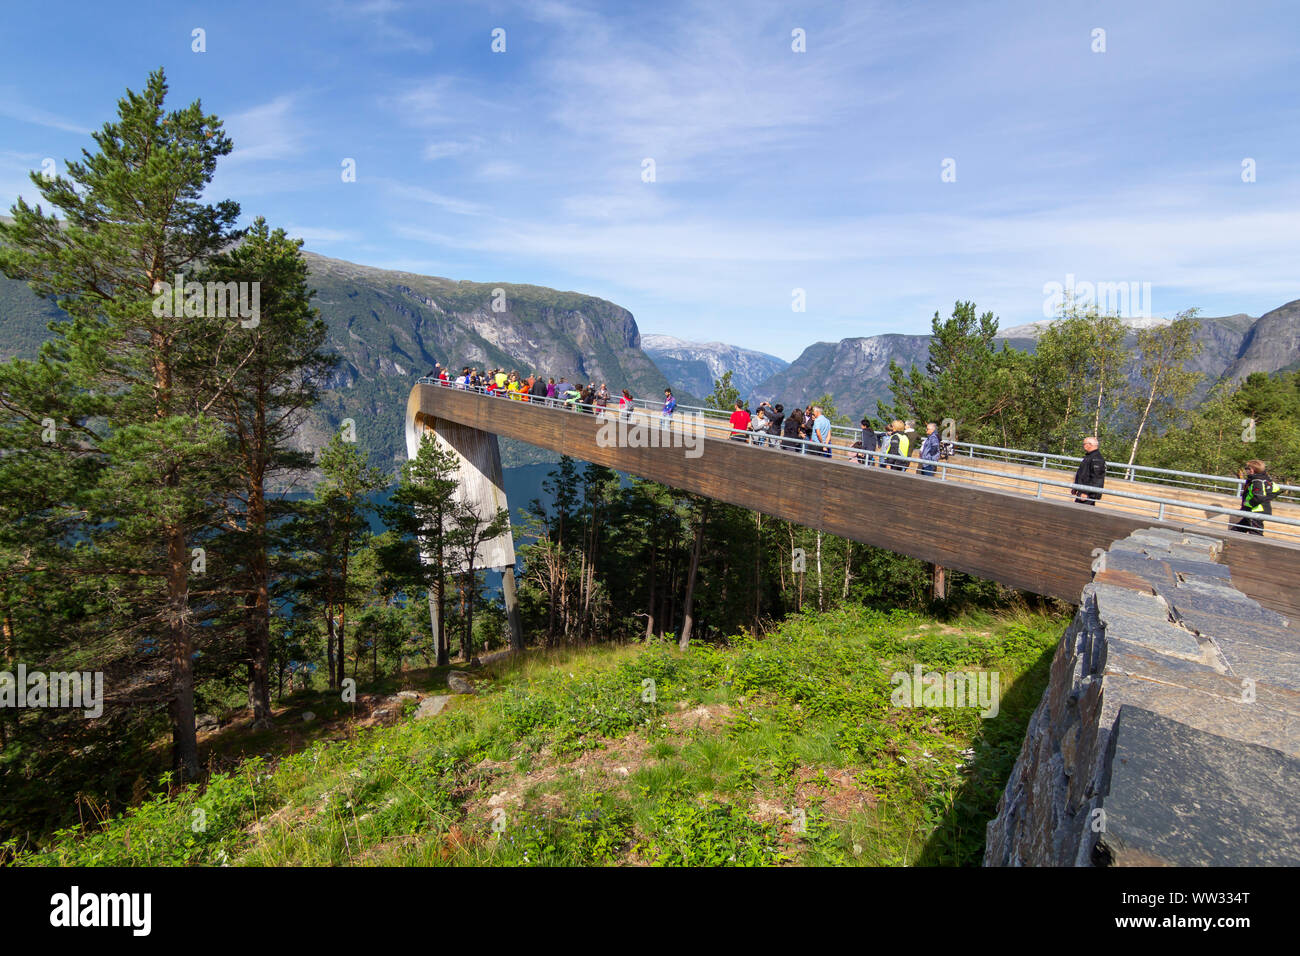 People looking at Aurlandsfjord from the top of Stegastein viewpoint platform, a modern architecture lookout with maje Stock Photo